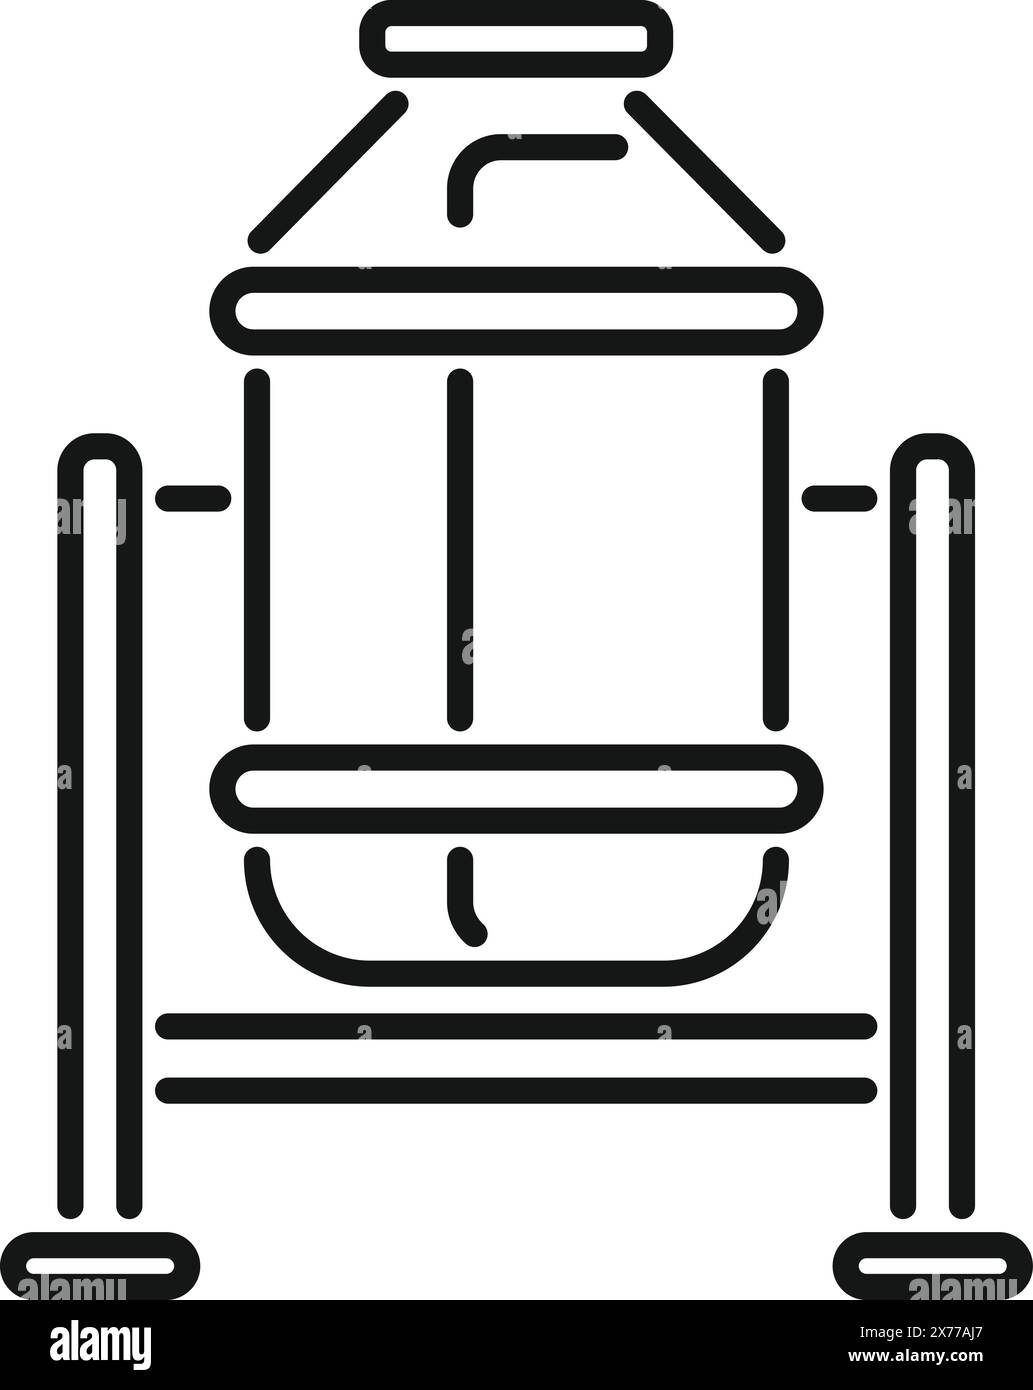 Black and white vector illustration of a modern fire hydrant Stock Vector